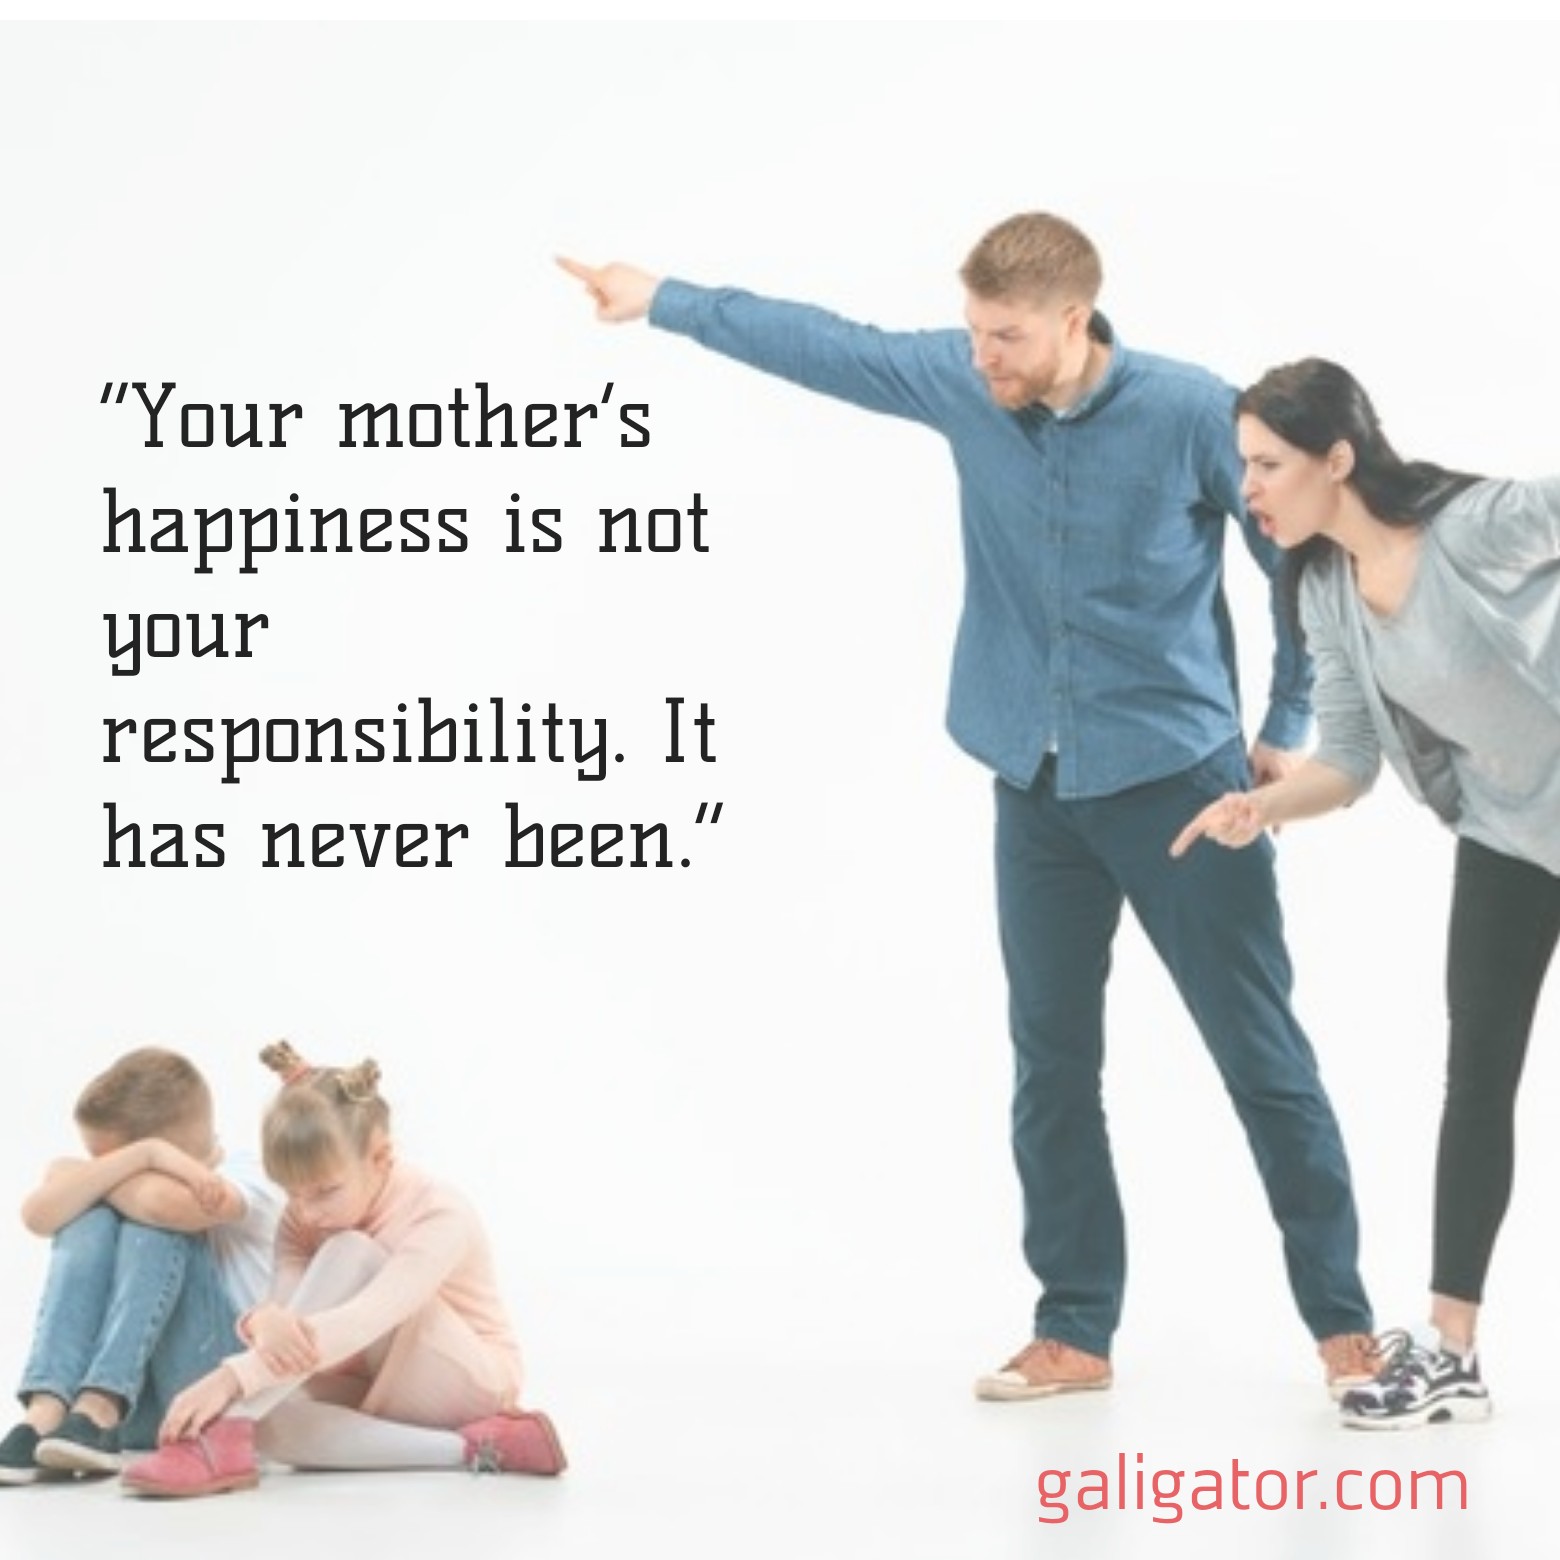 selfish parents quotes, abandonment selfish parents quotes, unhealthy relationship selfish parents quotes, selfish parental alienation quotes, quotes about parents being selfish